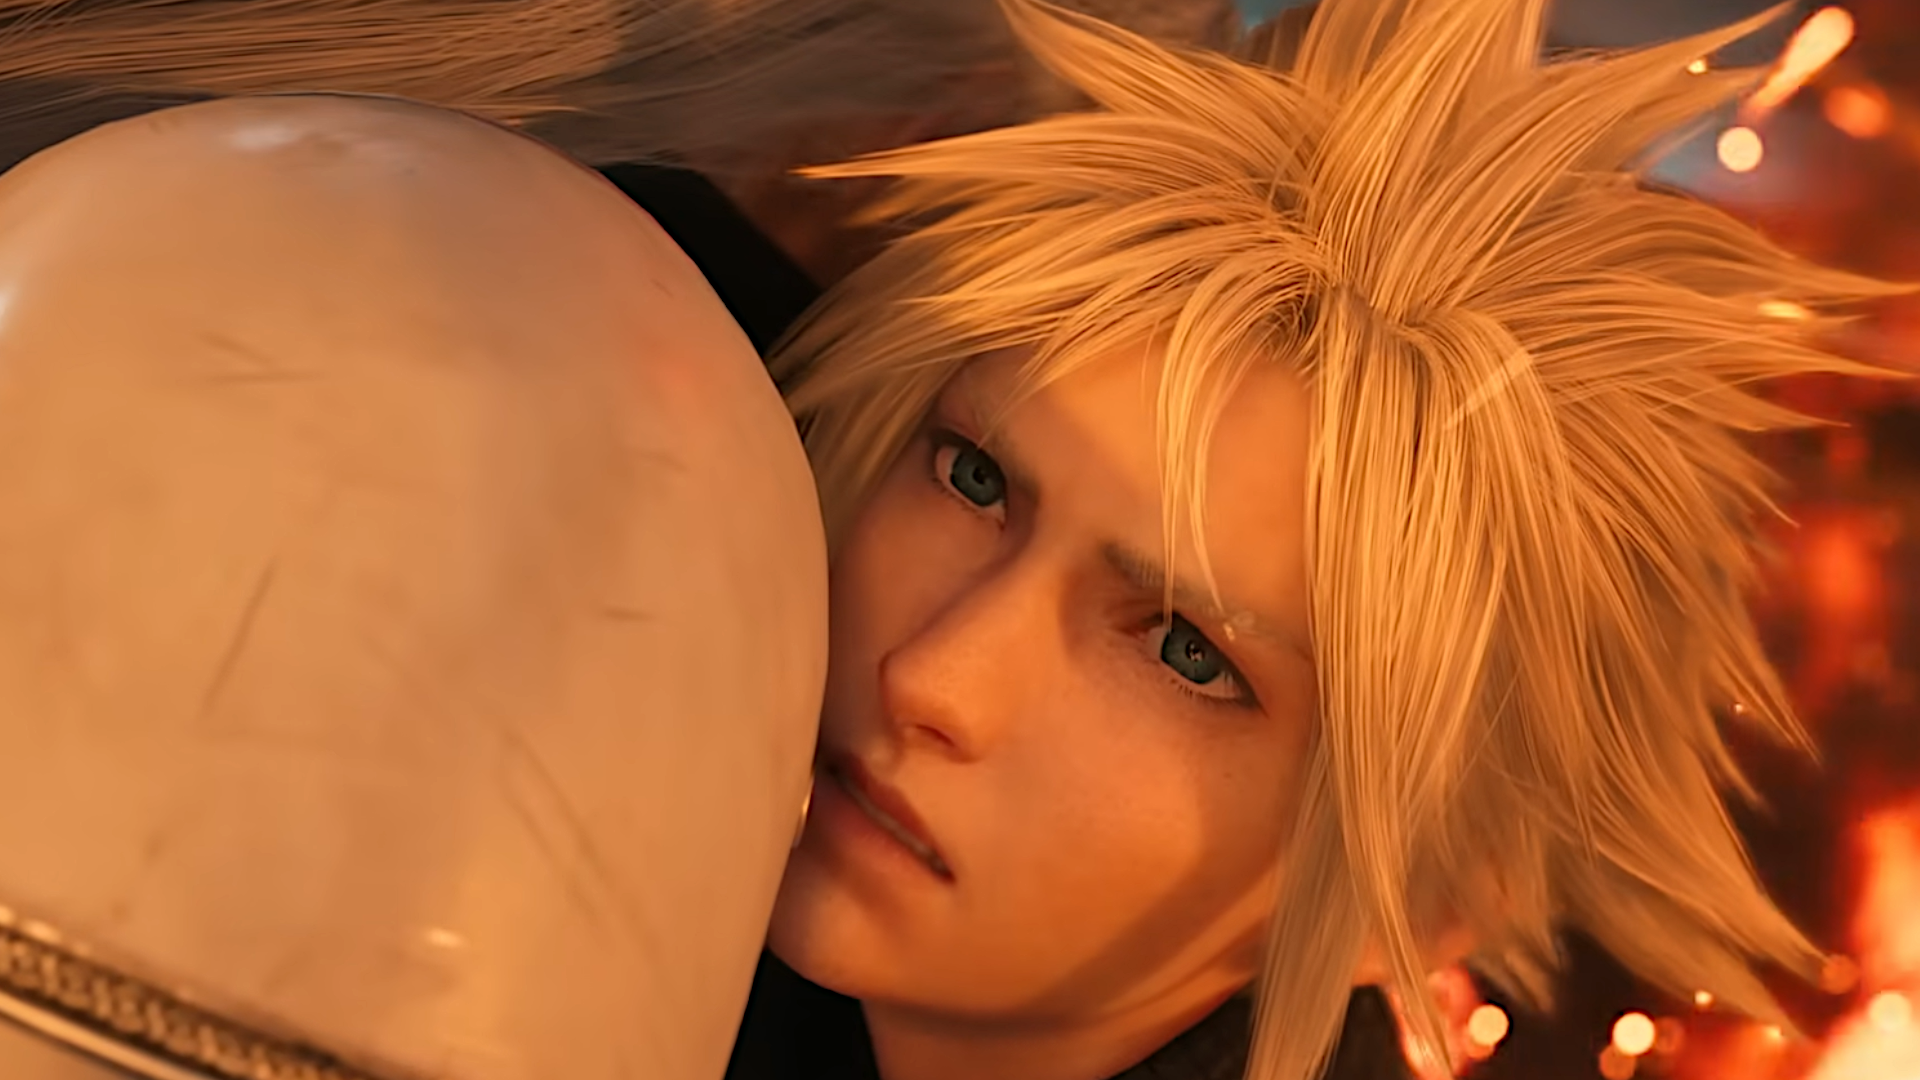 Final Fantasy 7 Rebirth's director wants series vets and newbies alike to be surprised by its twist and turns, seeing the remake as more than 'just a callback'